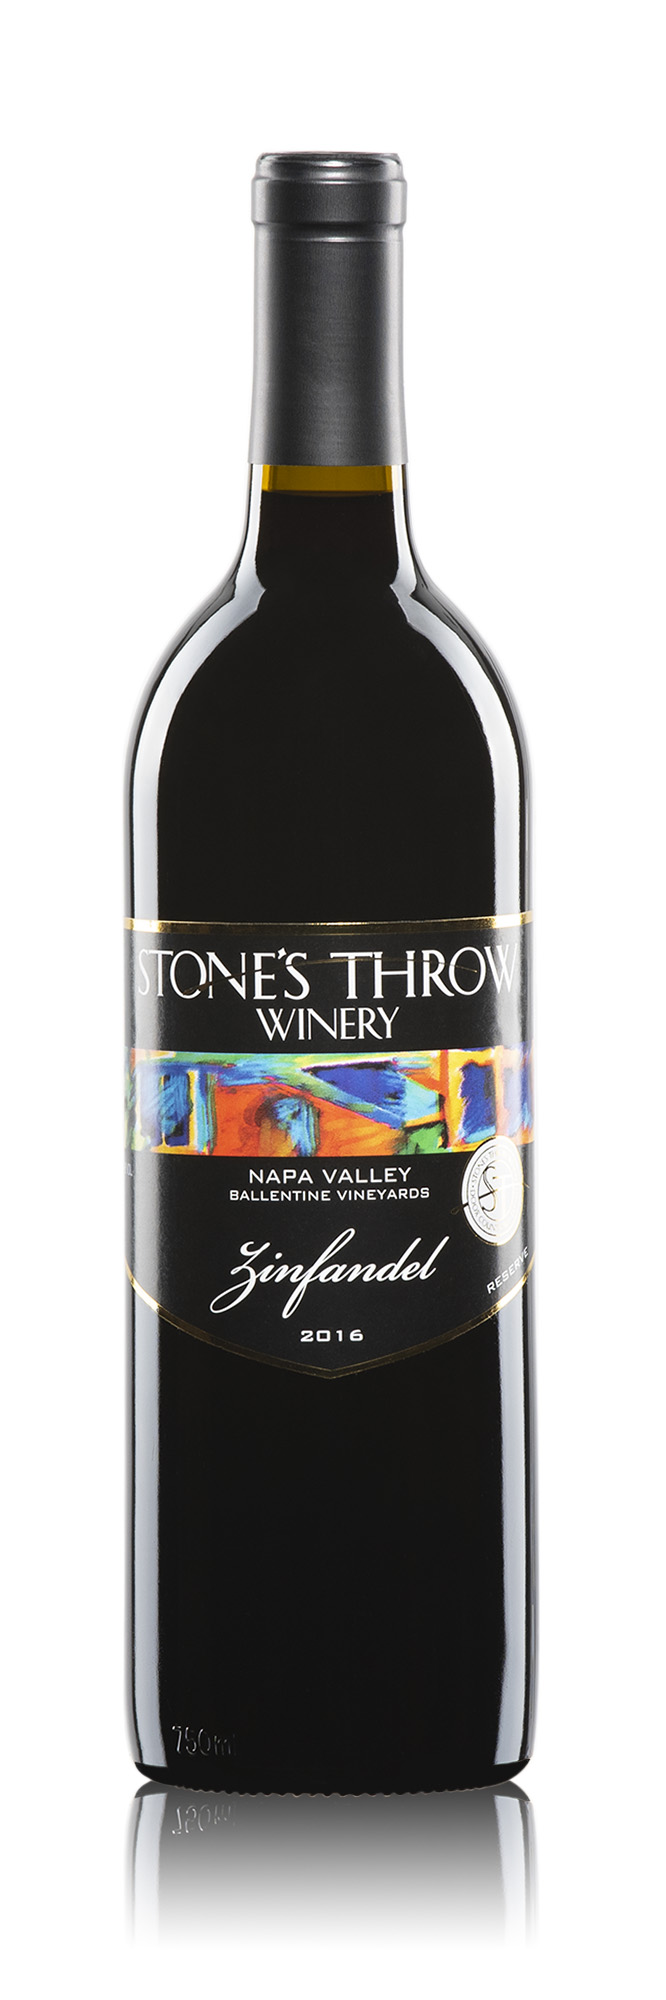 Product Image for Zinfandel, Reserve, St. Helena, Napa Valley 2019